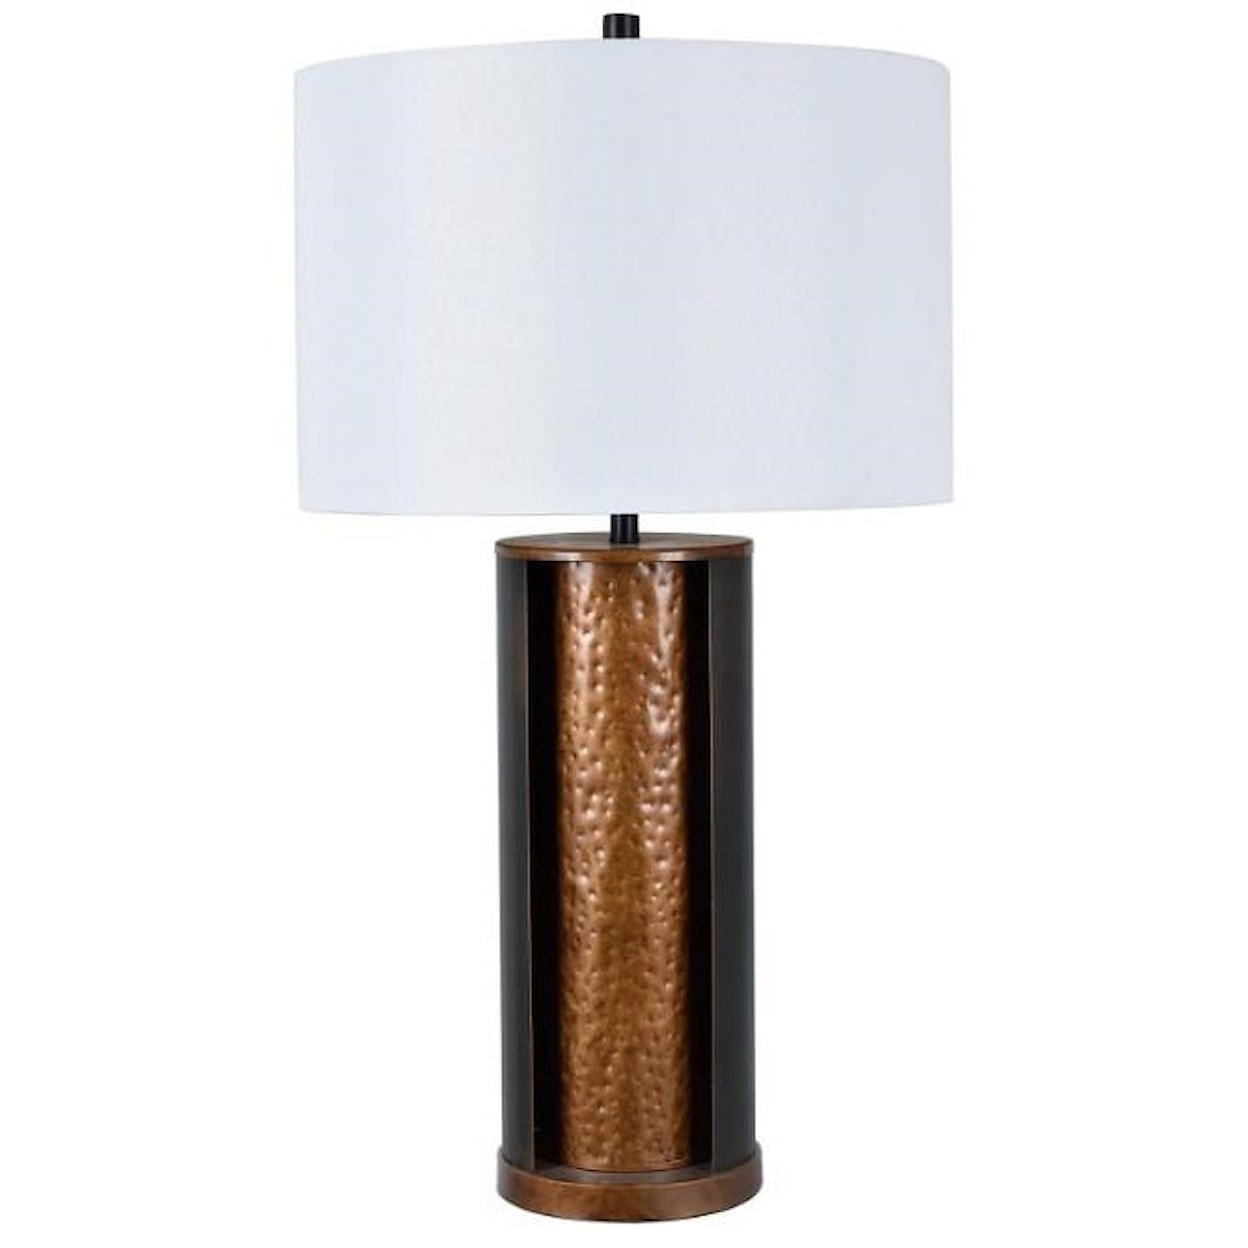 Crestview Collection Lighting Foundry Hammered Table Lamp w/ Night Light